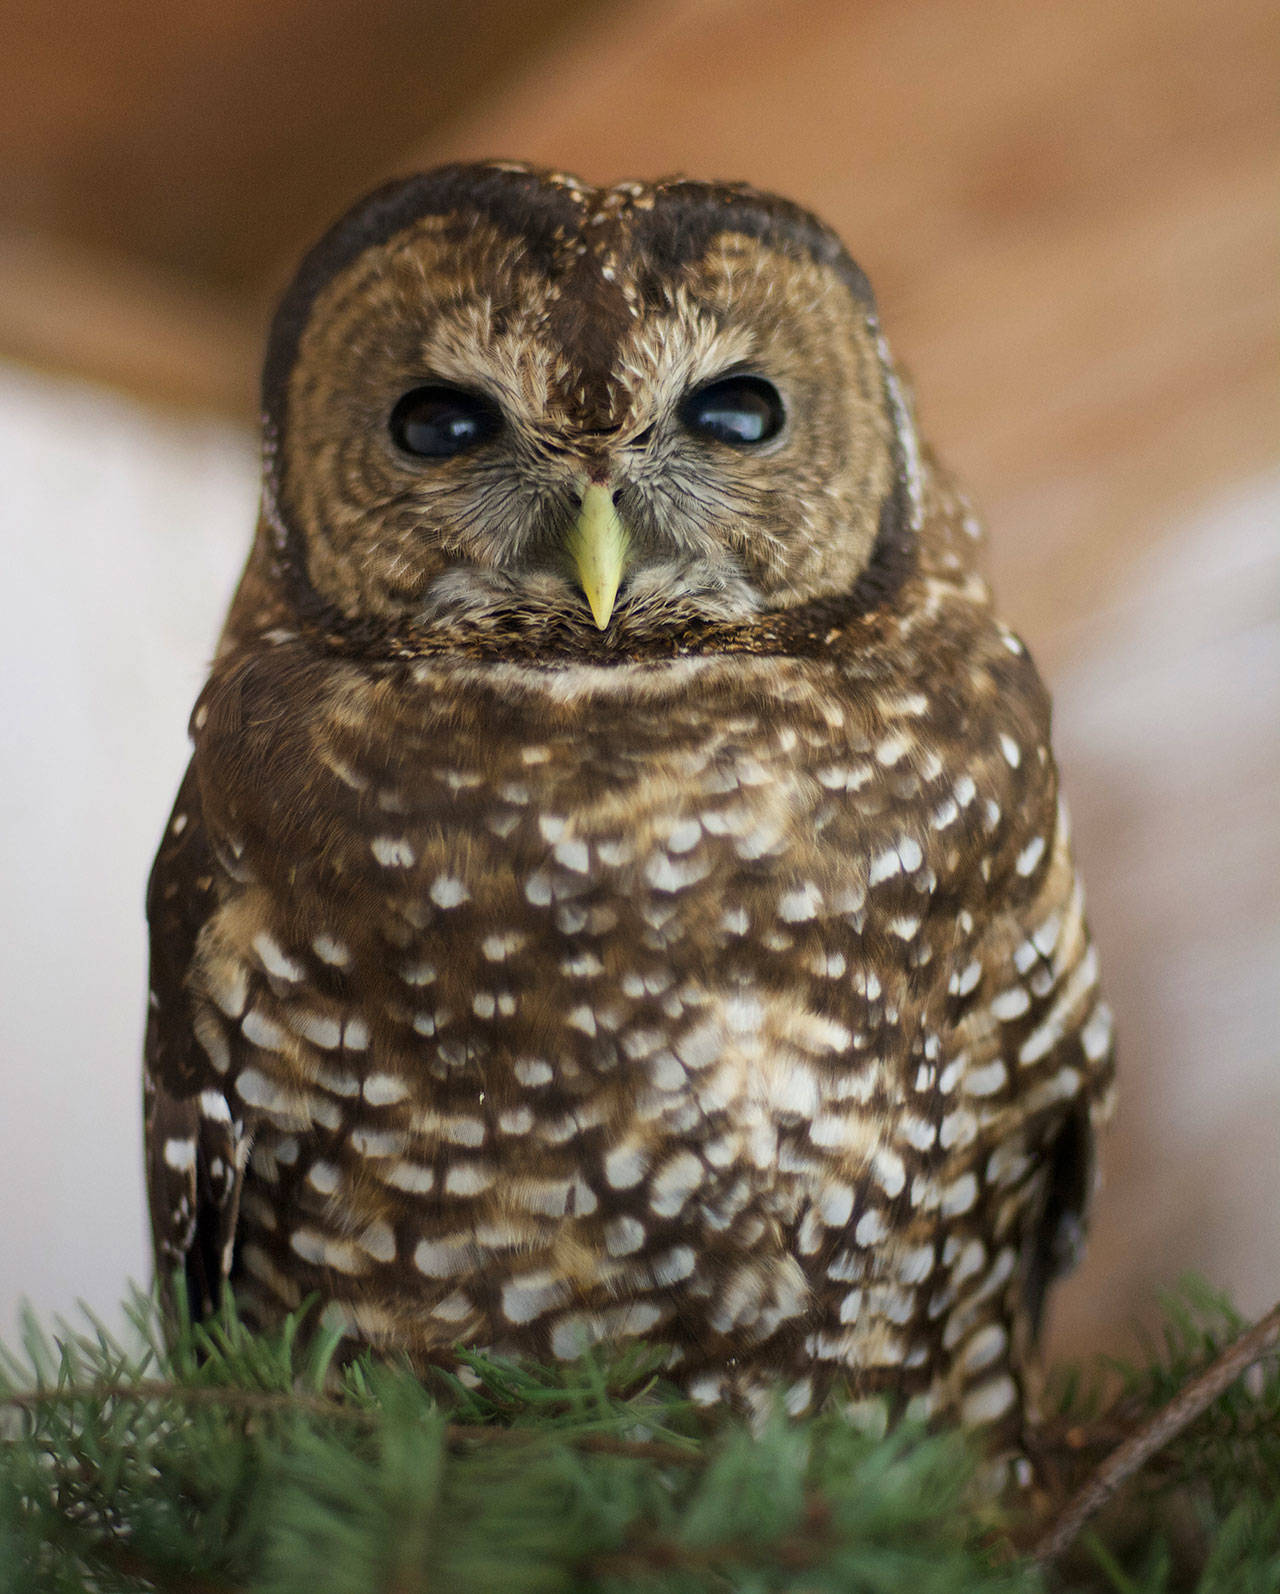 A rare northern spotted owl rehabilitated by Bainbridge Island’s West Sound Wildlife Shelter. (Jay Wiggs photo)